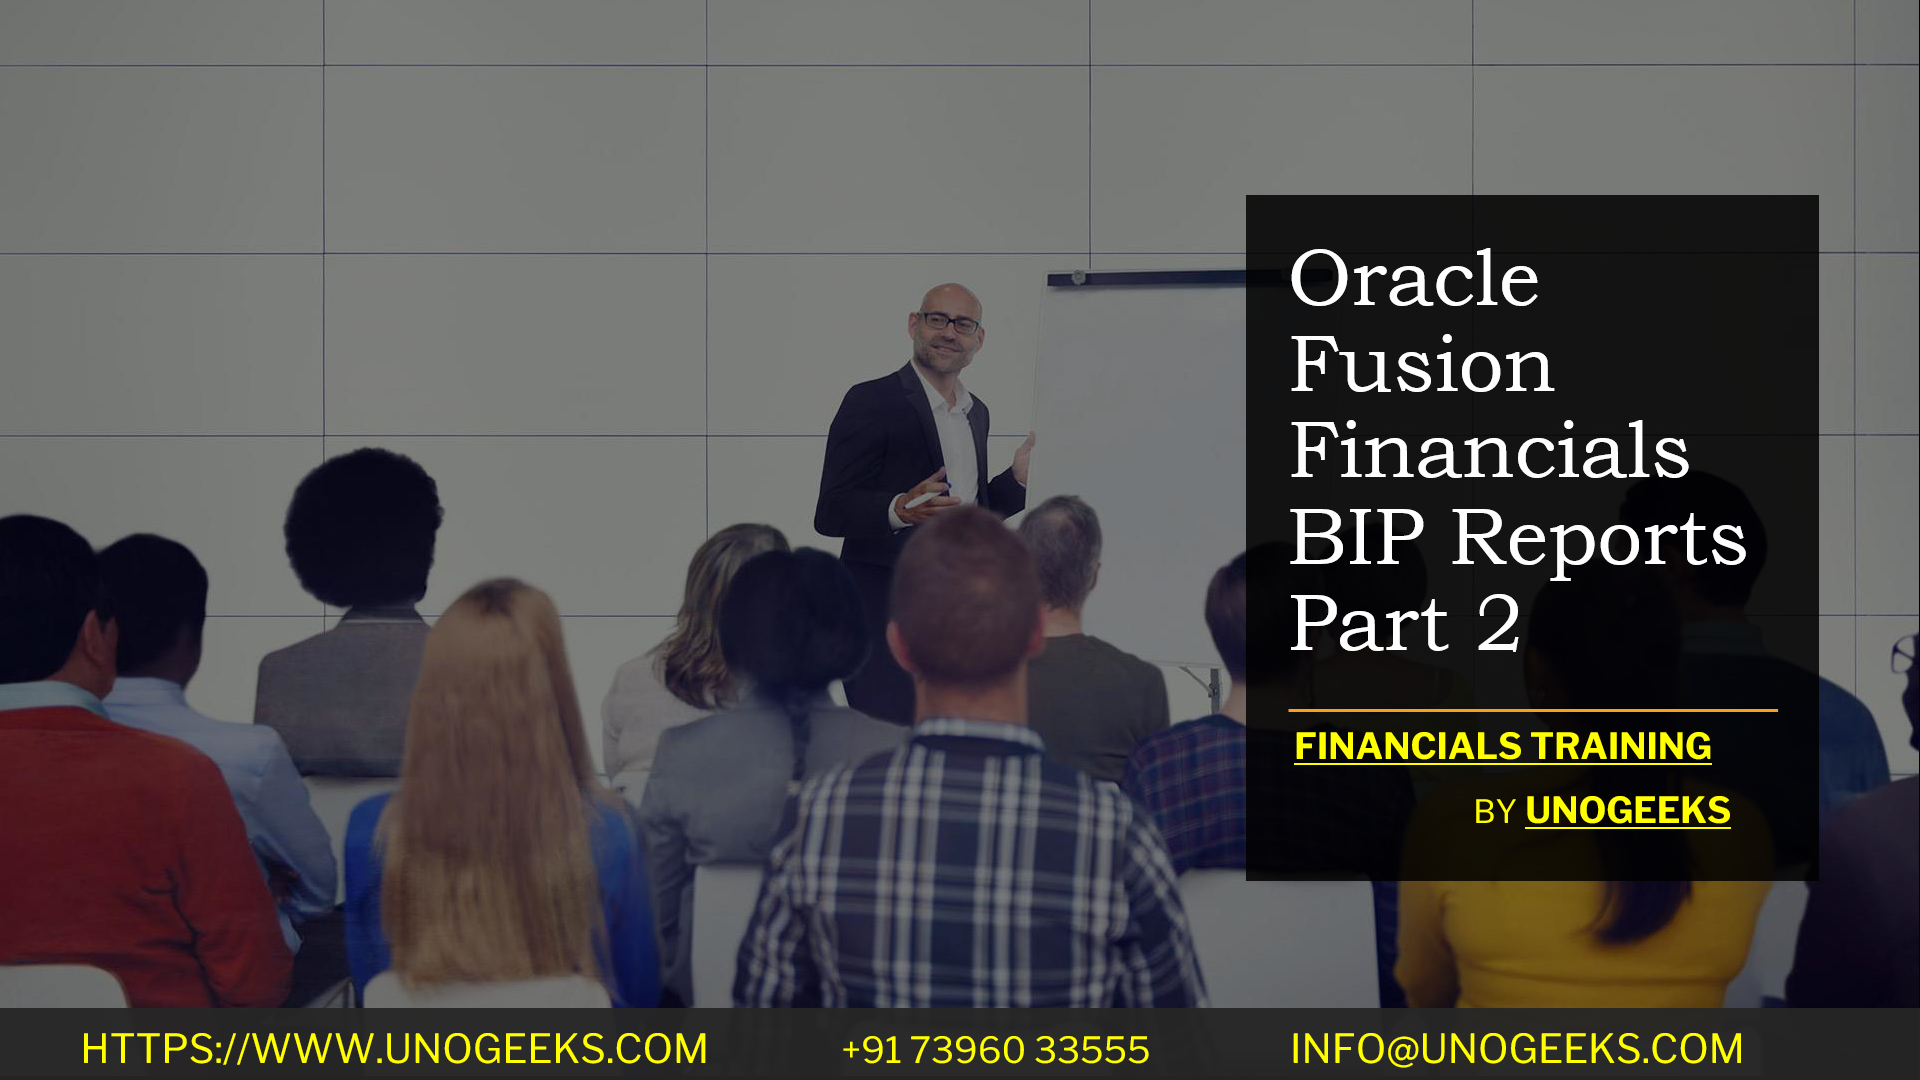 Oracle Fusion Financials BIP Reports Part 2